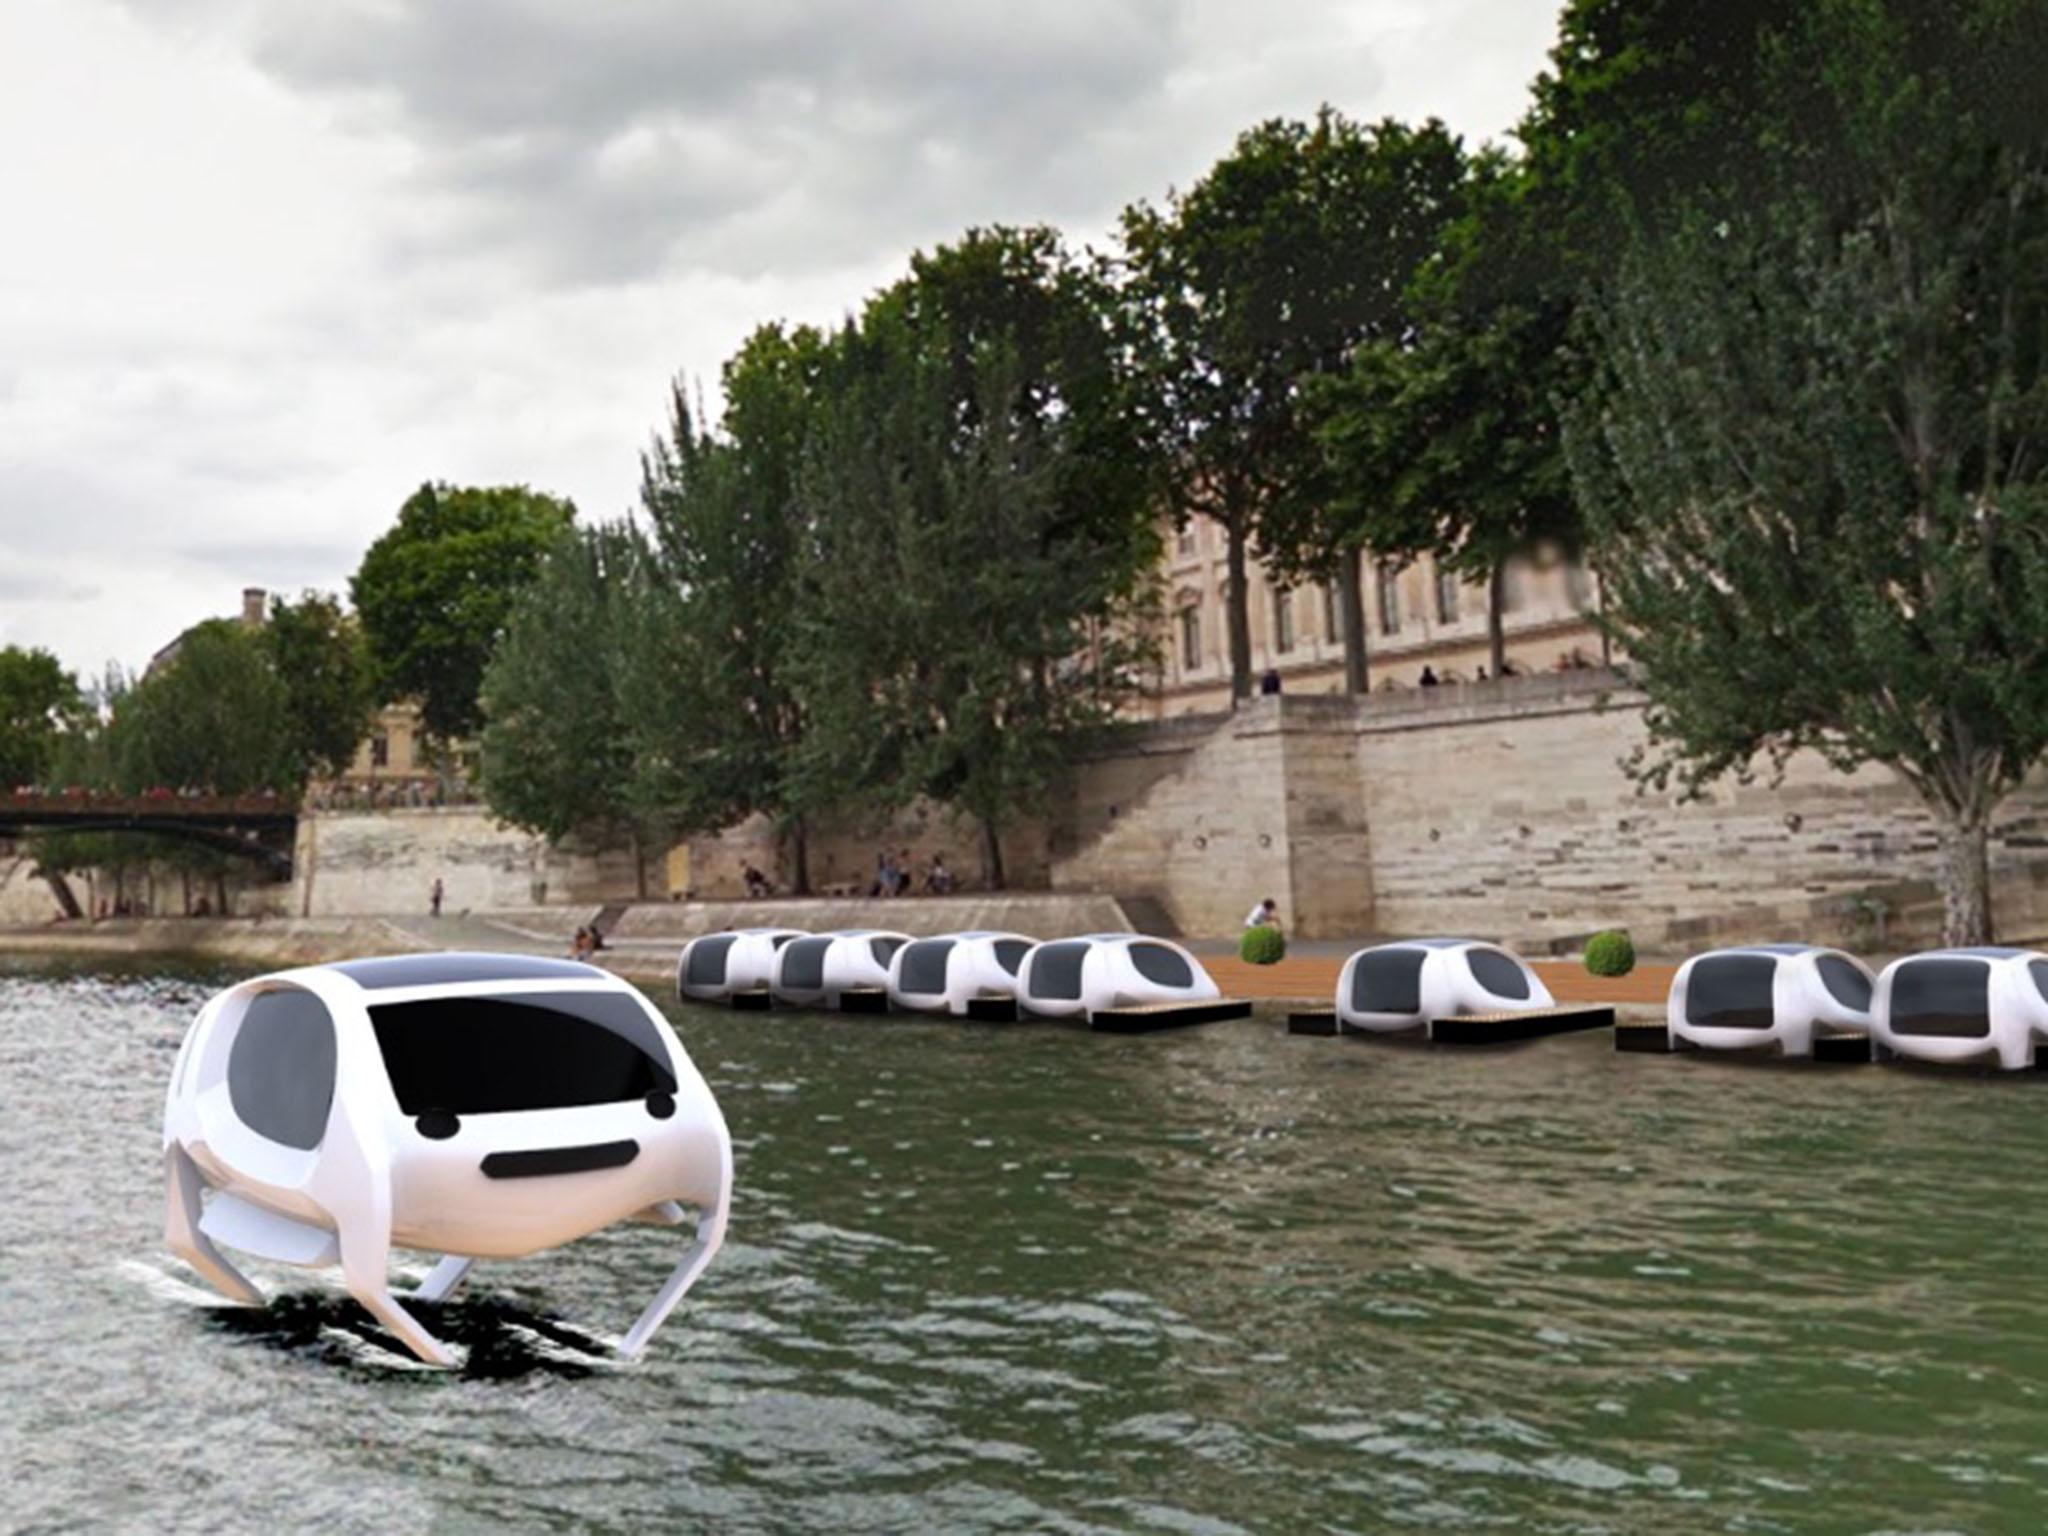 A company plans to launch a fleet of small electric hydrofoils on the Seine this summer